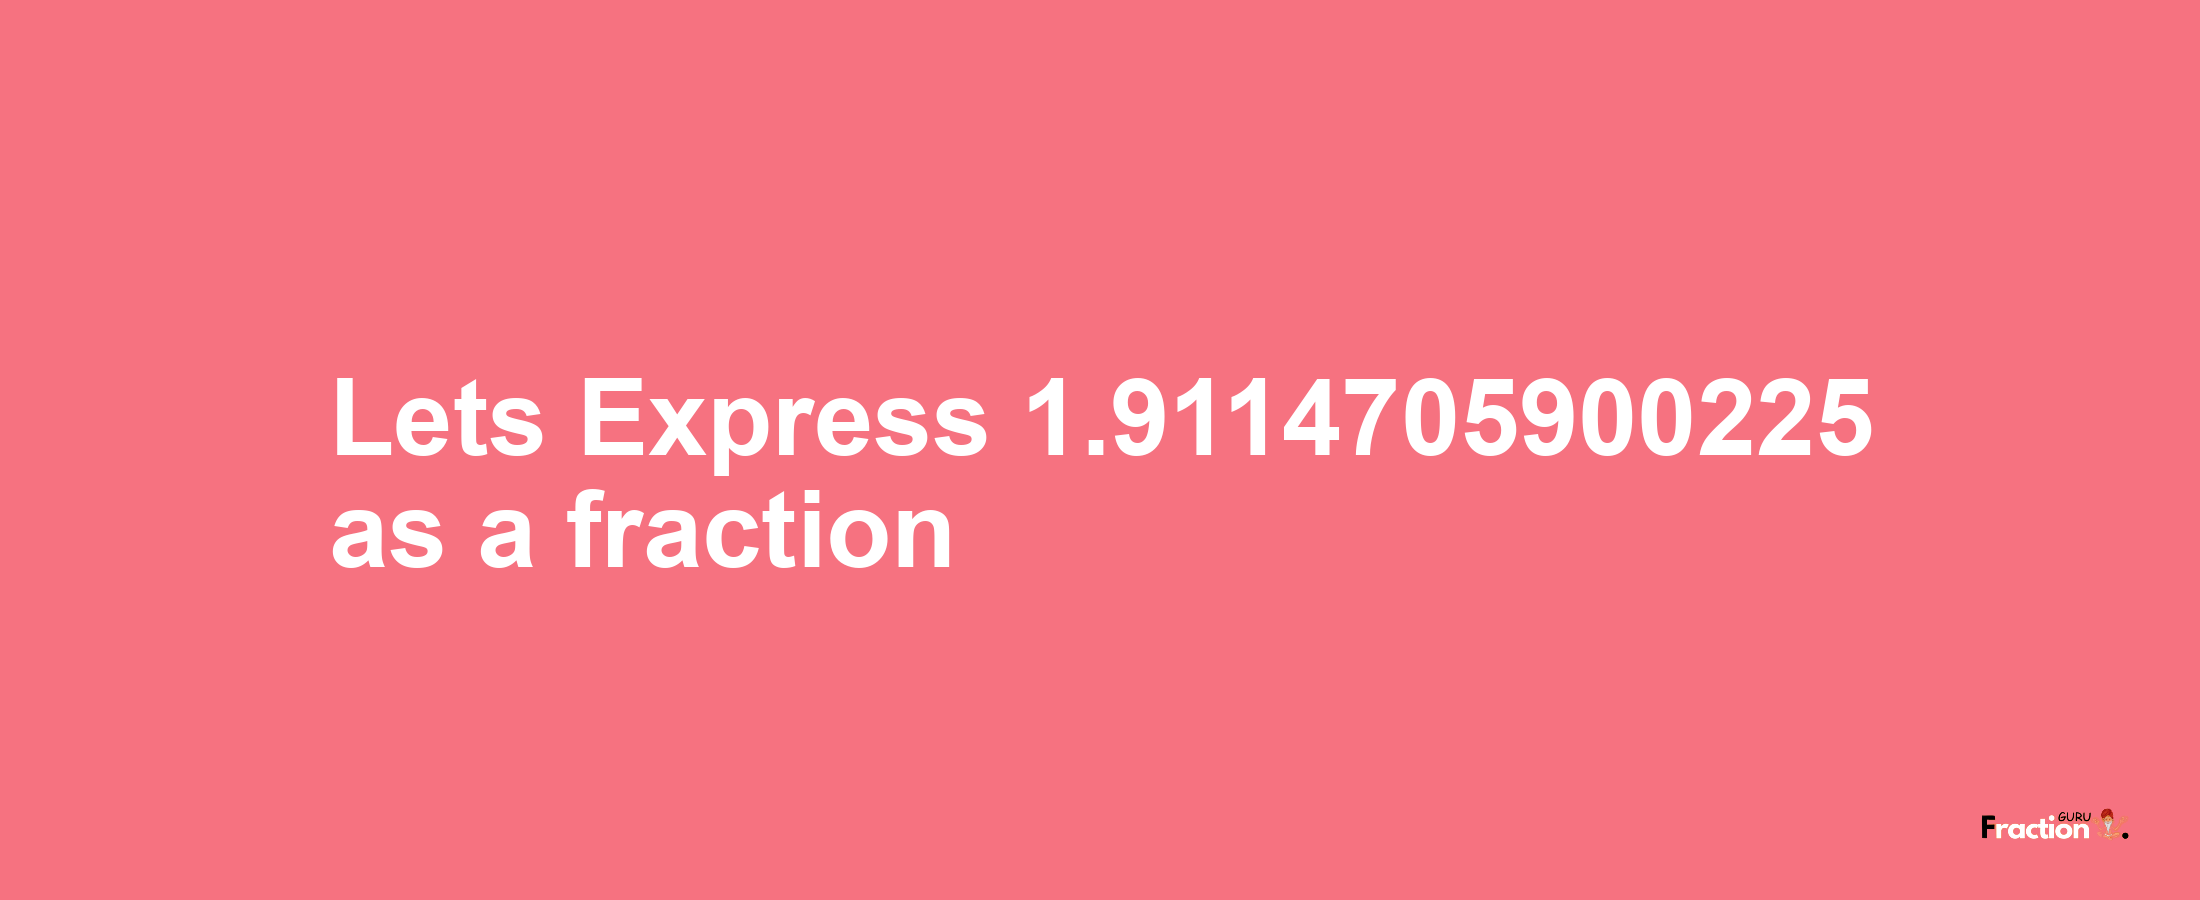 Lets Express 1.9114705900225 as afraction